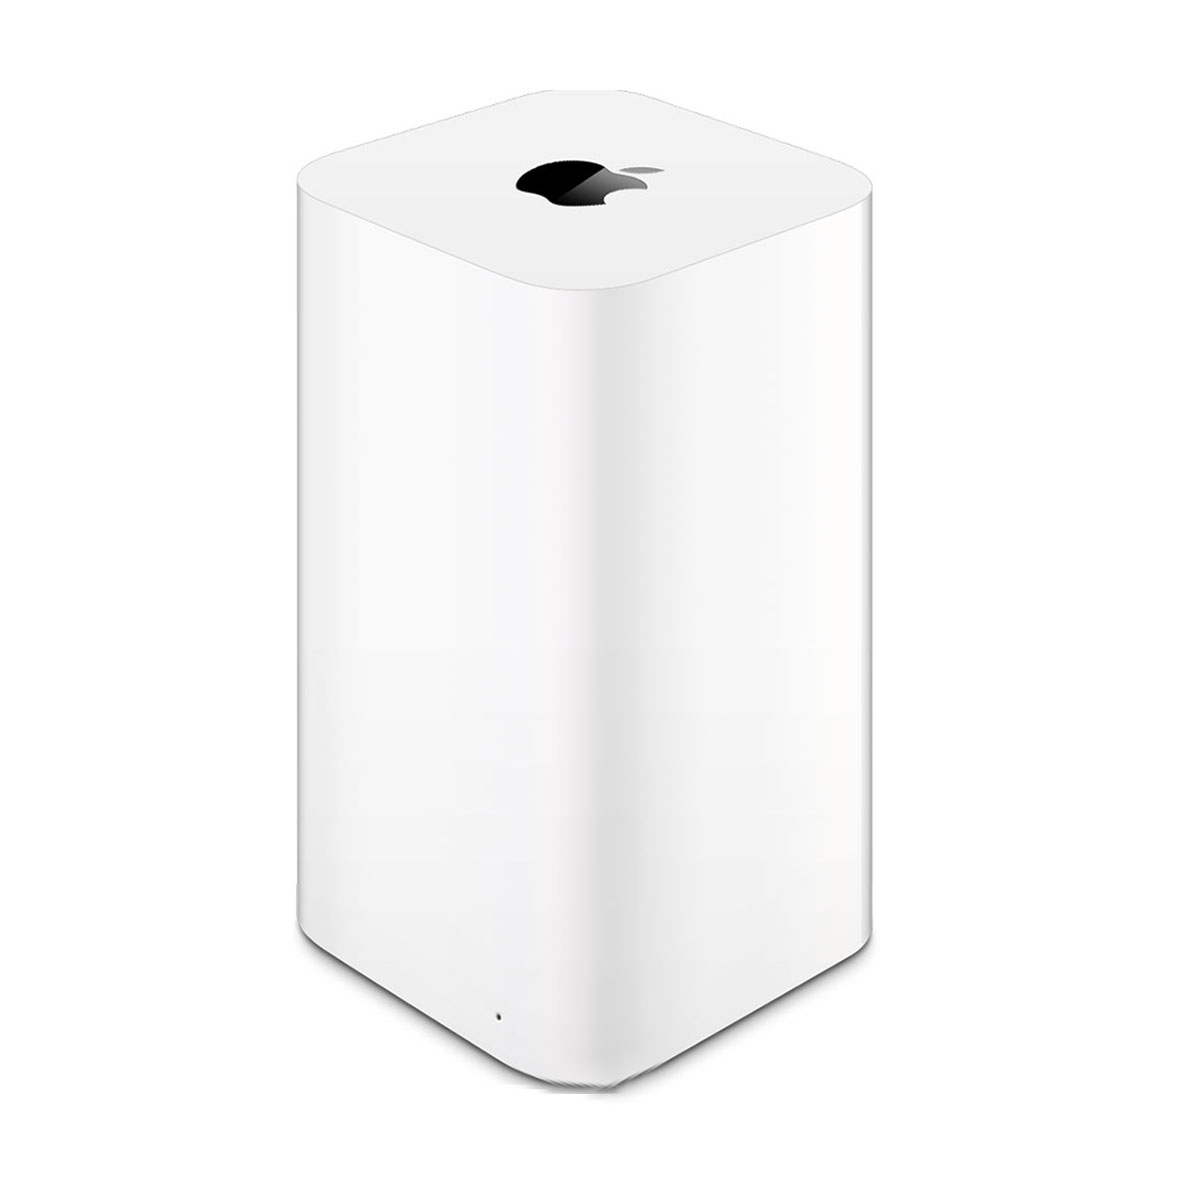 Featured image for “AirMac  タイムカプセル A1470 802.11ac 2TB ME177J/A”